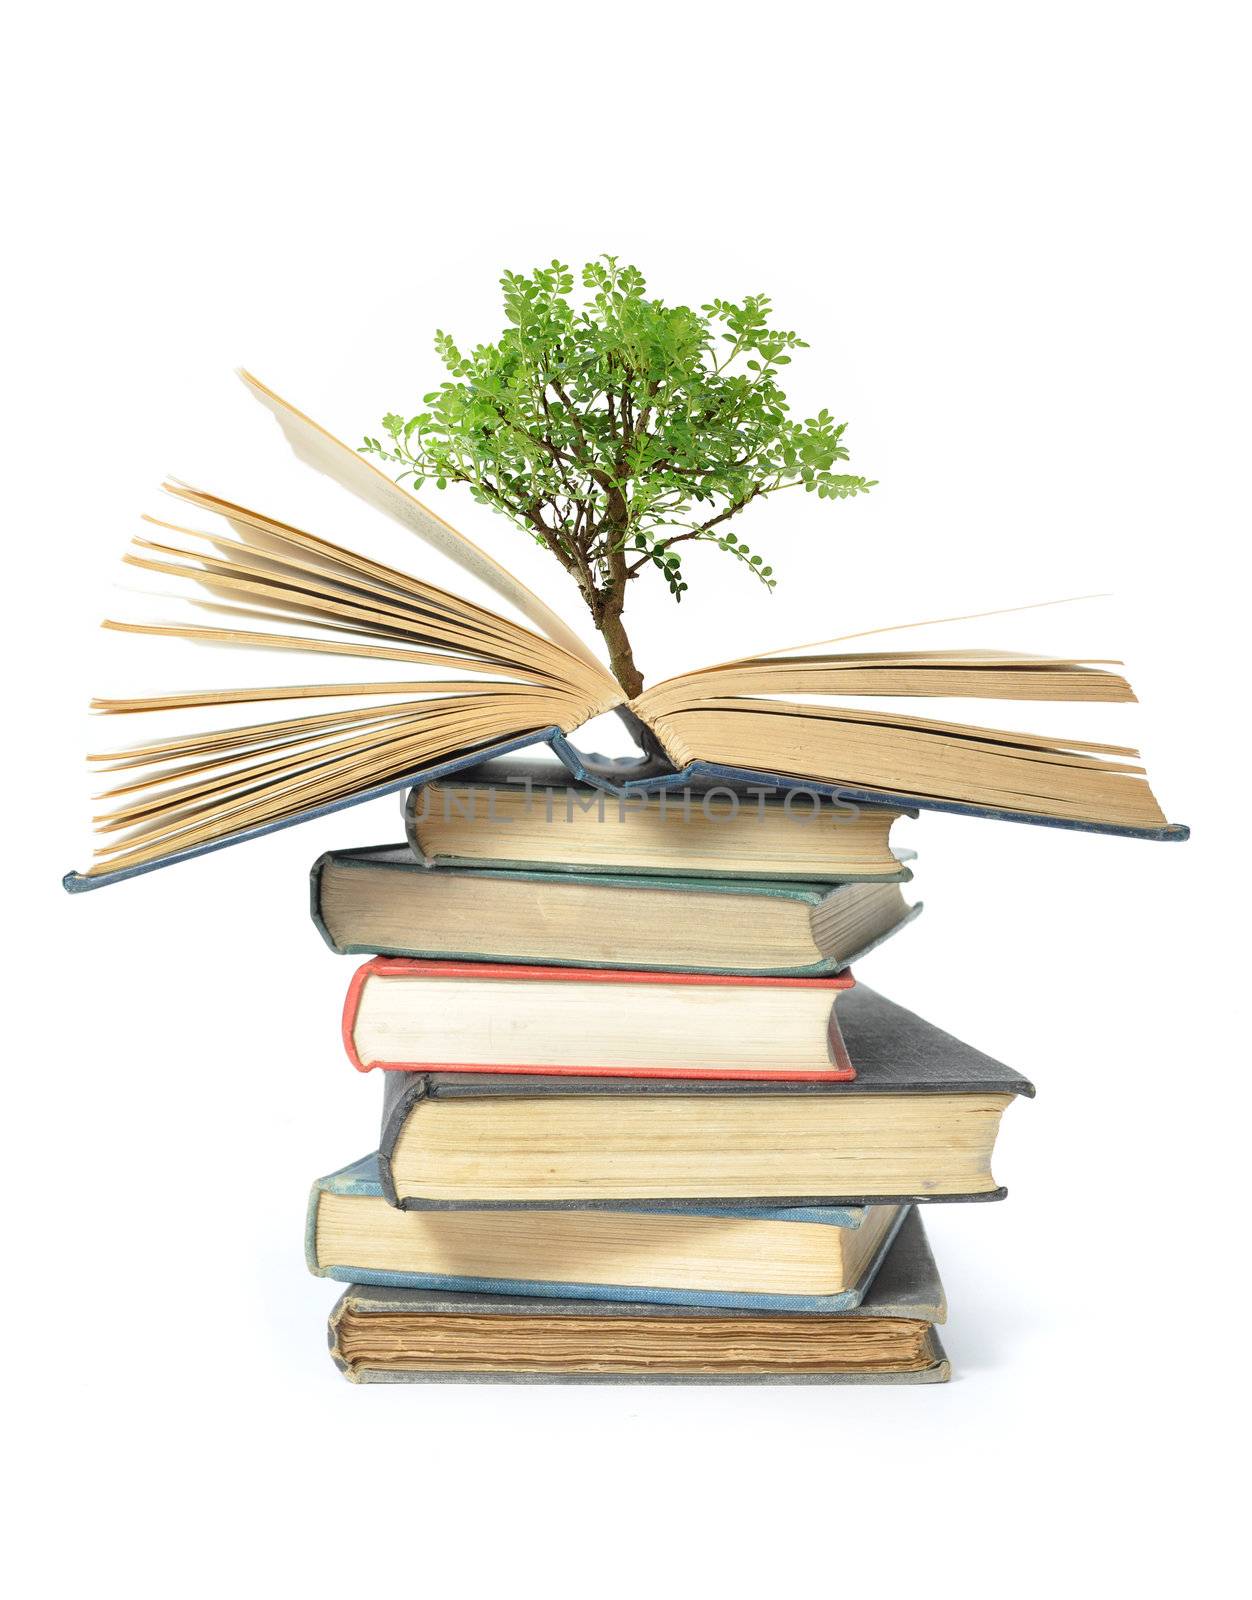 Tree growing from book  by unikpix